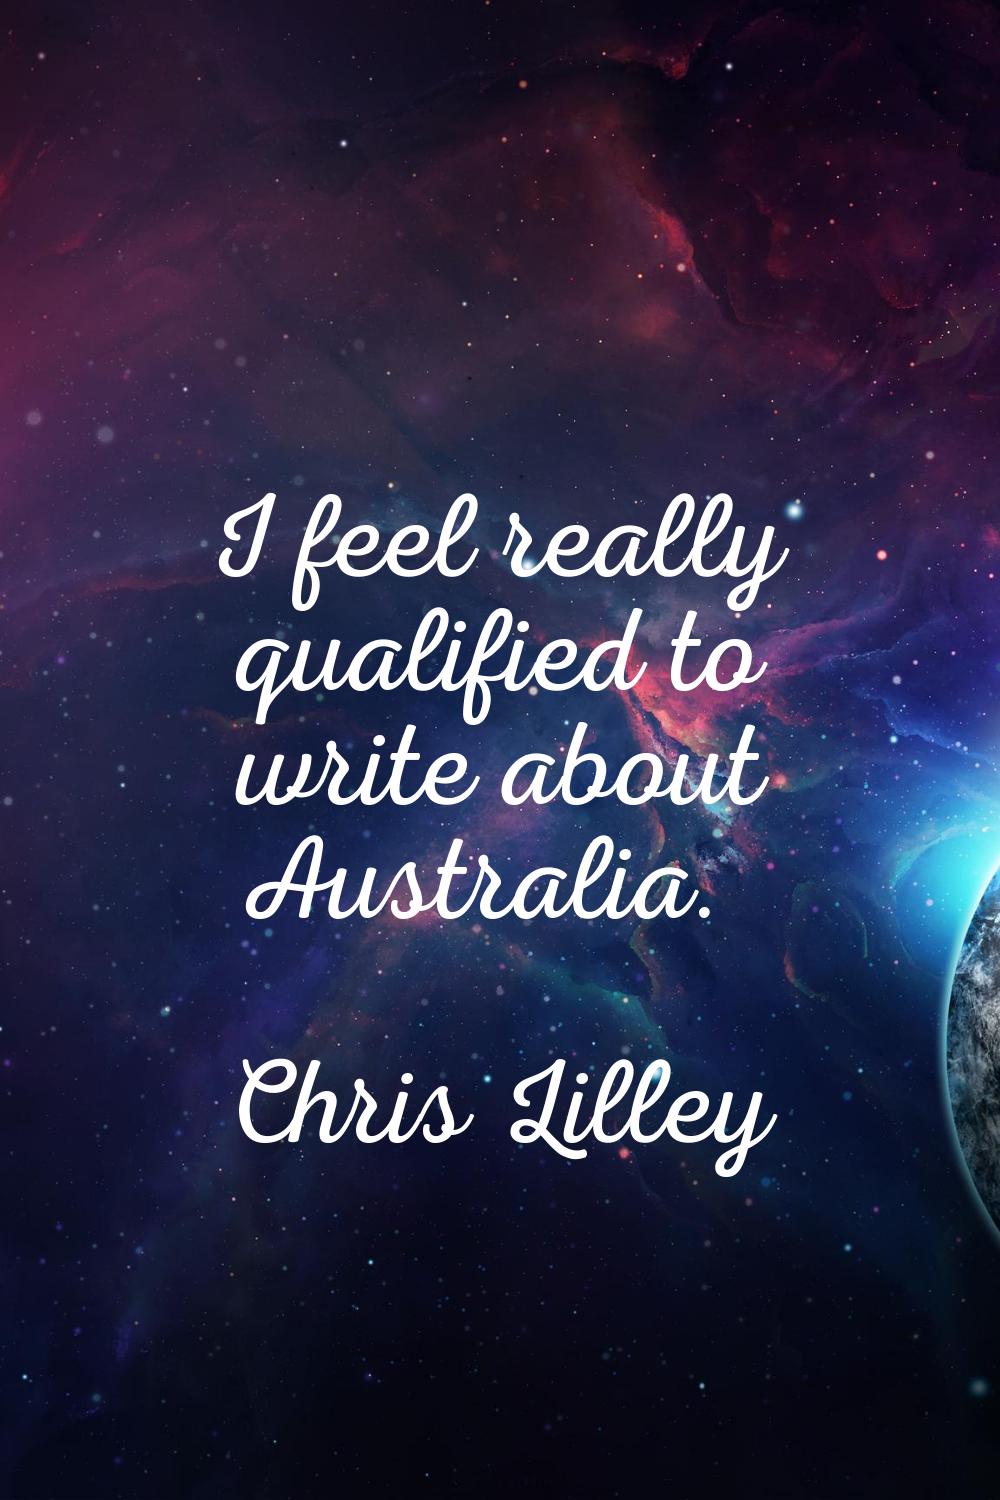 I feel really qualified to write about Australia.